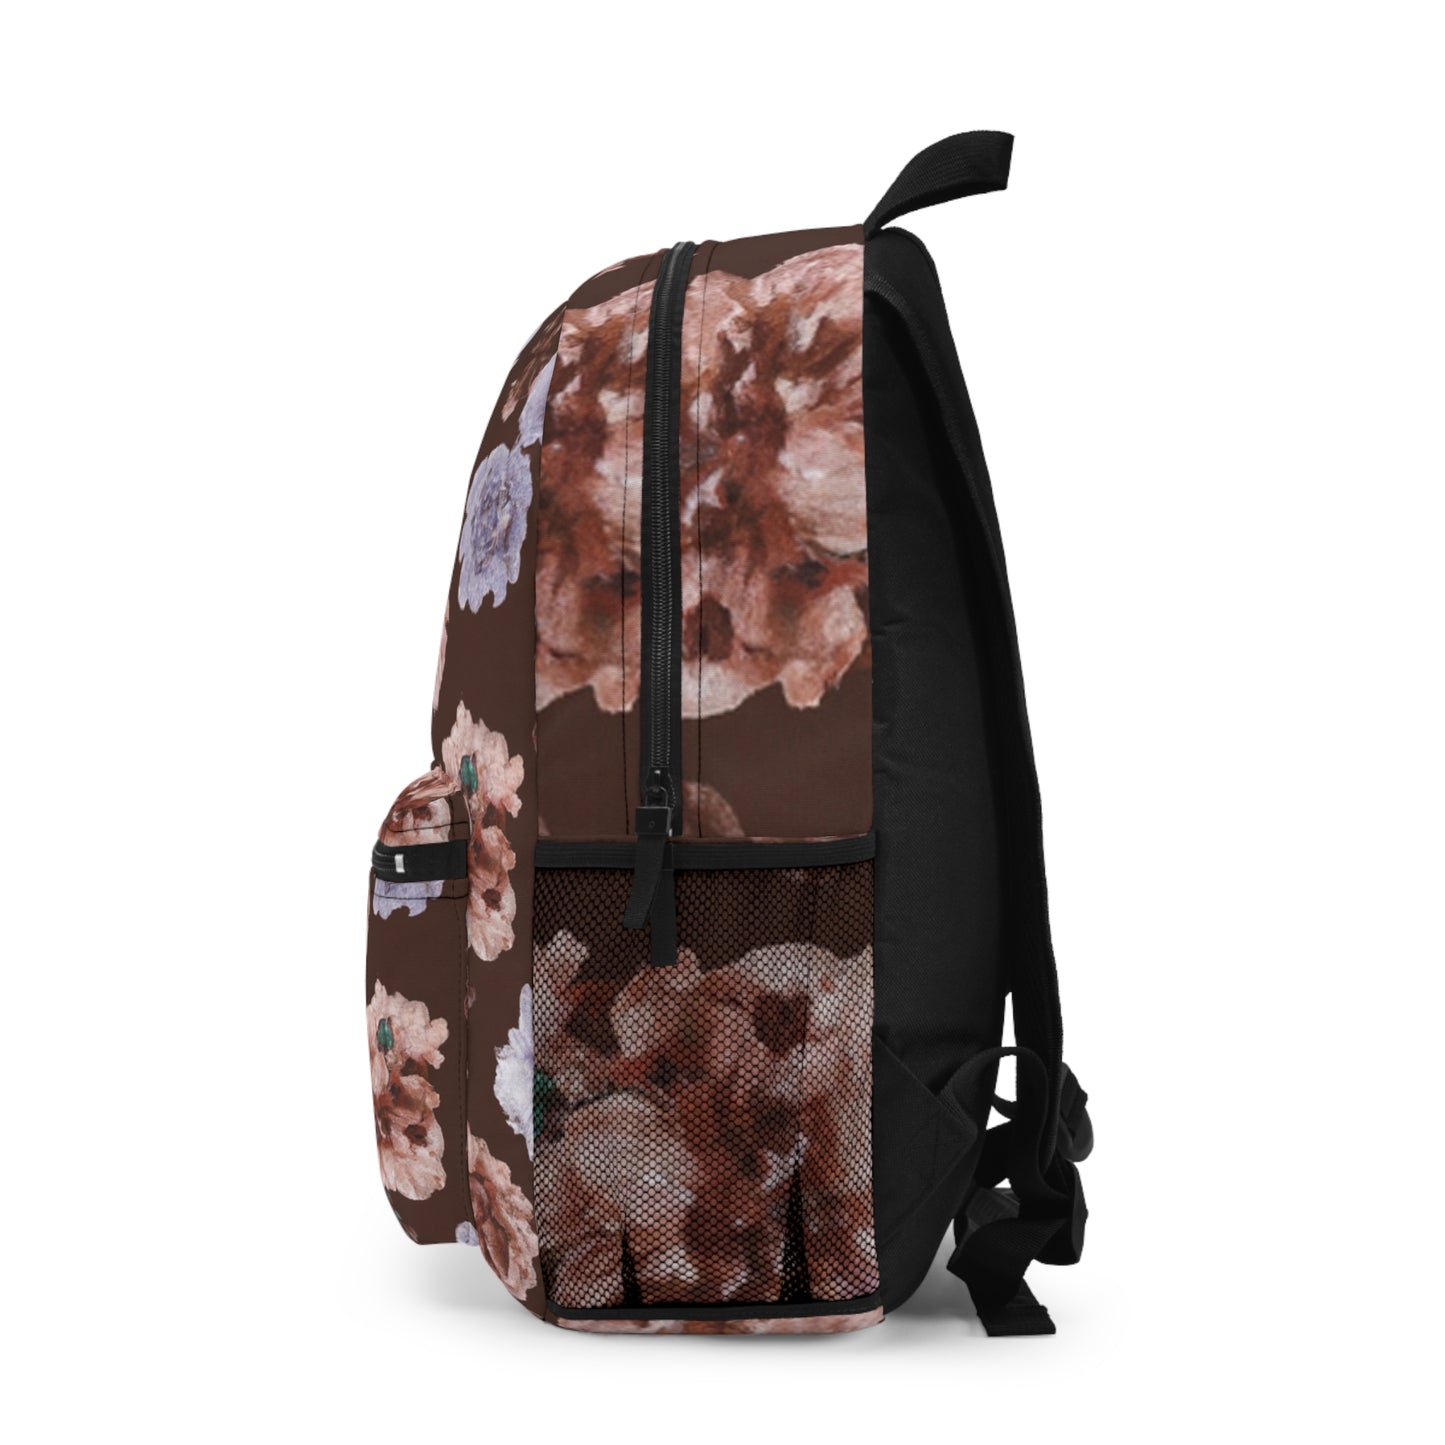 Winsome Blossoms - Backpack